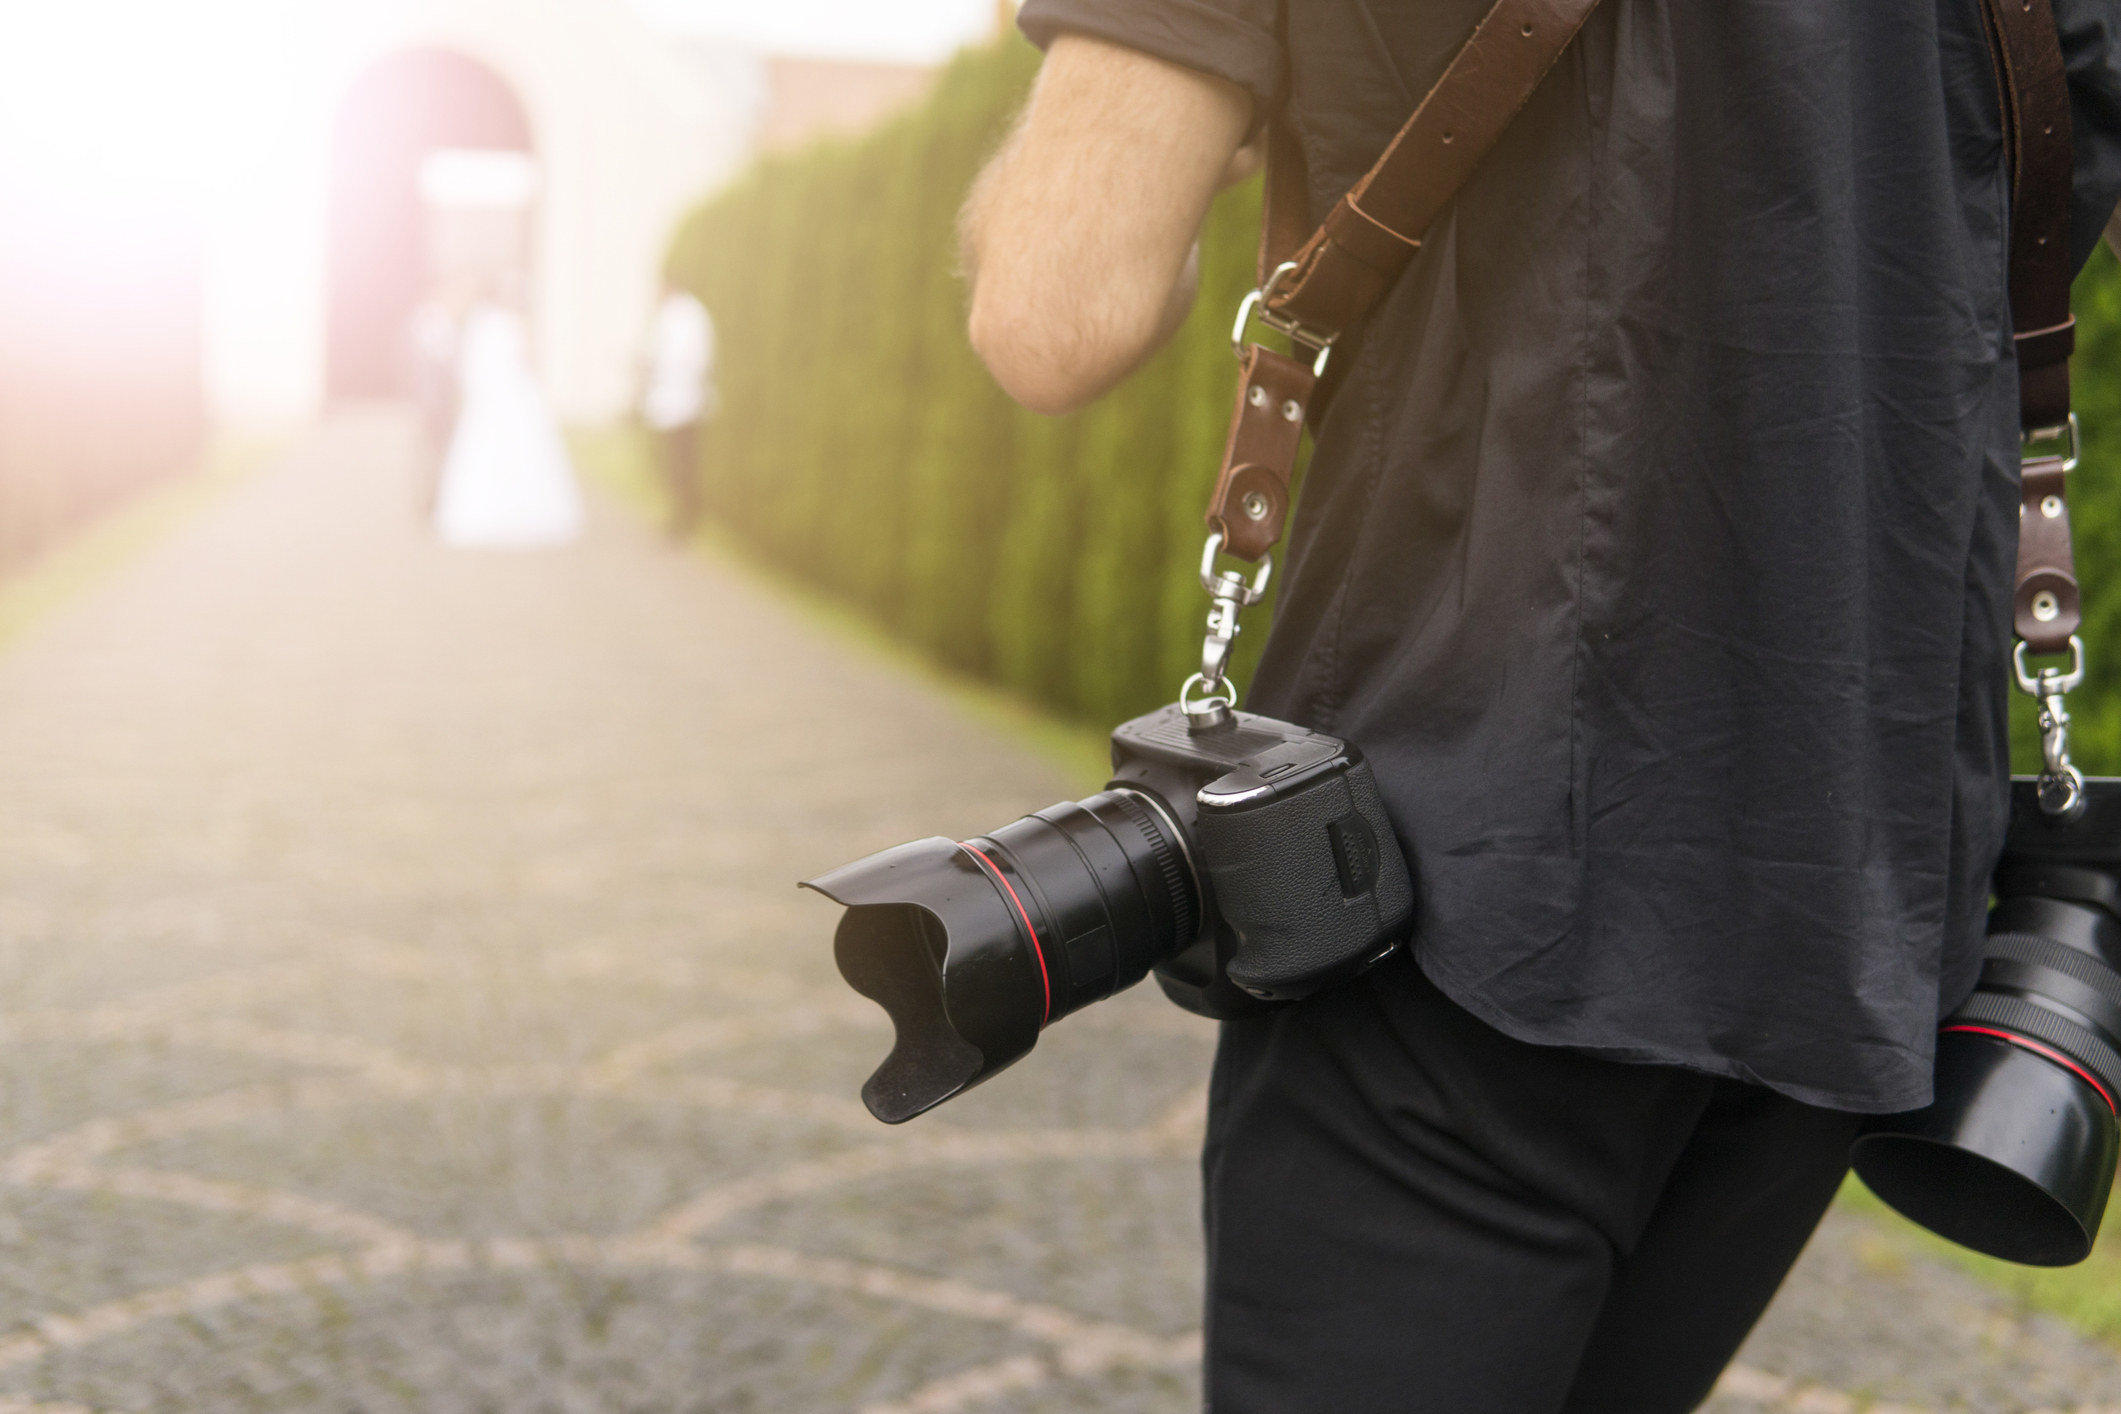 A wedding photographer with two cameras follows a bride and groom down a path